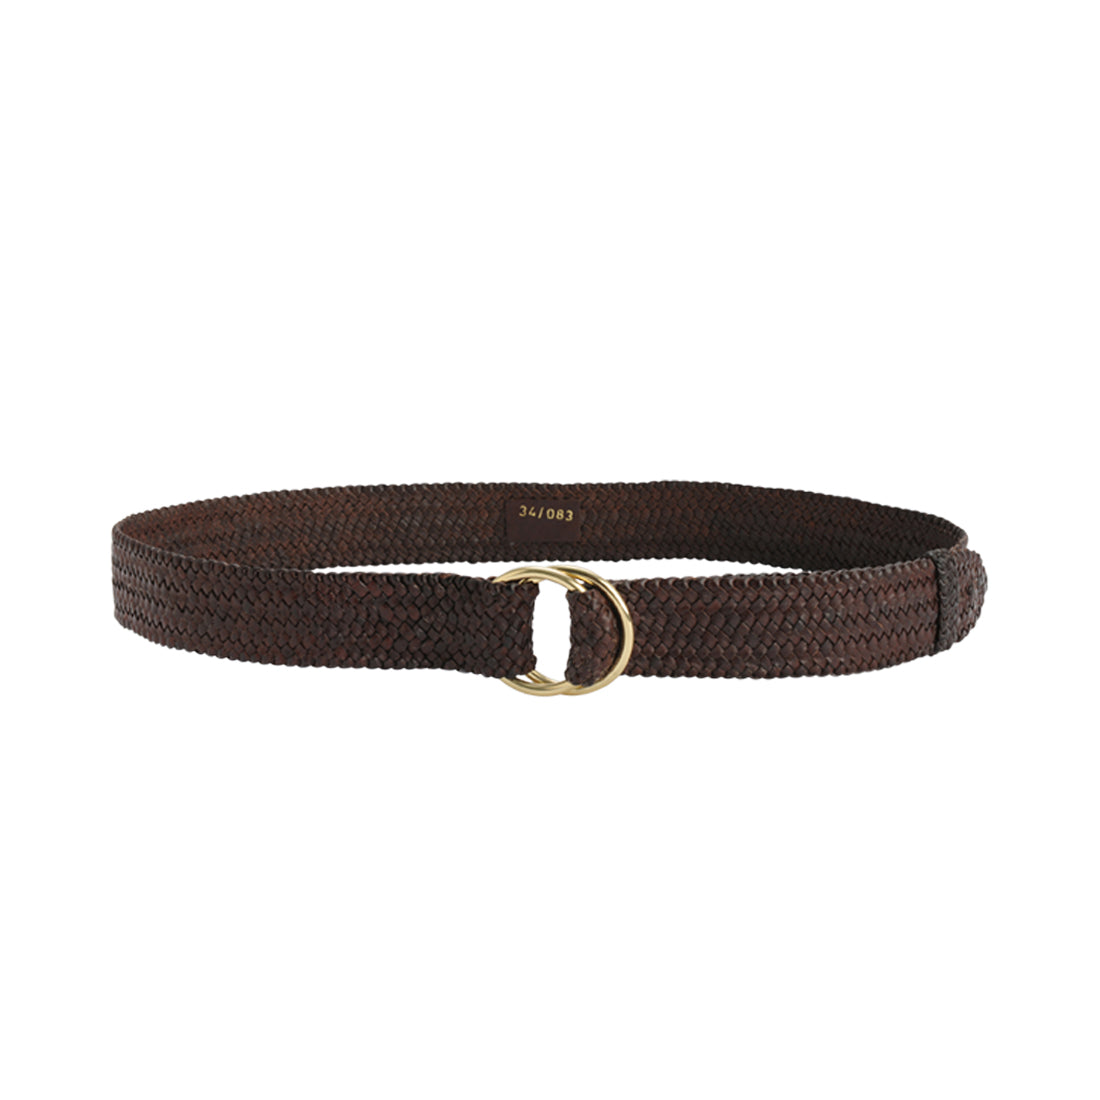 rm williams traditional belt